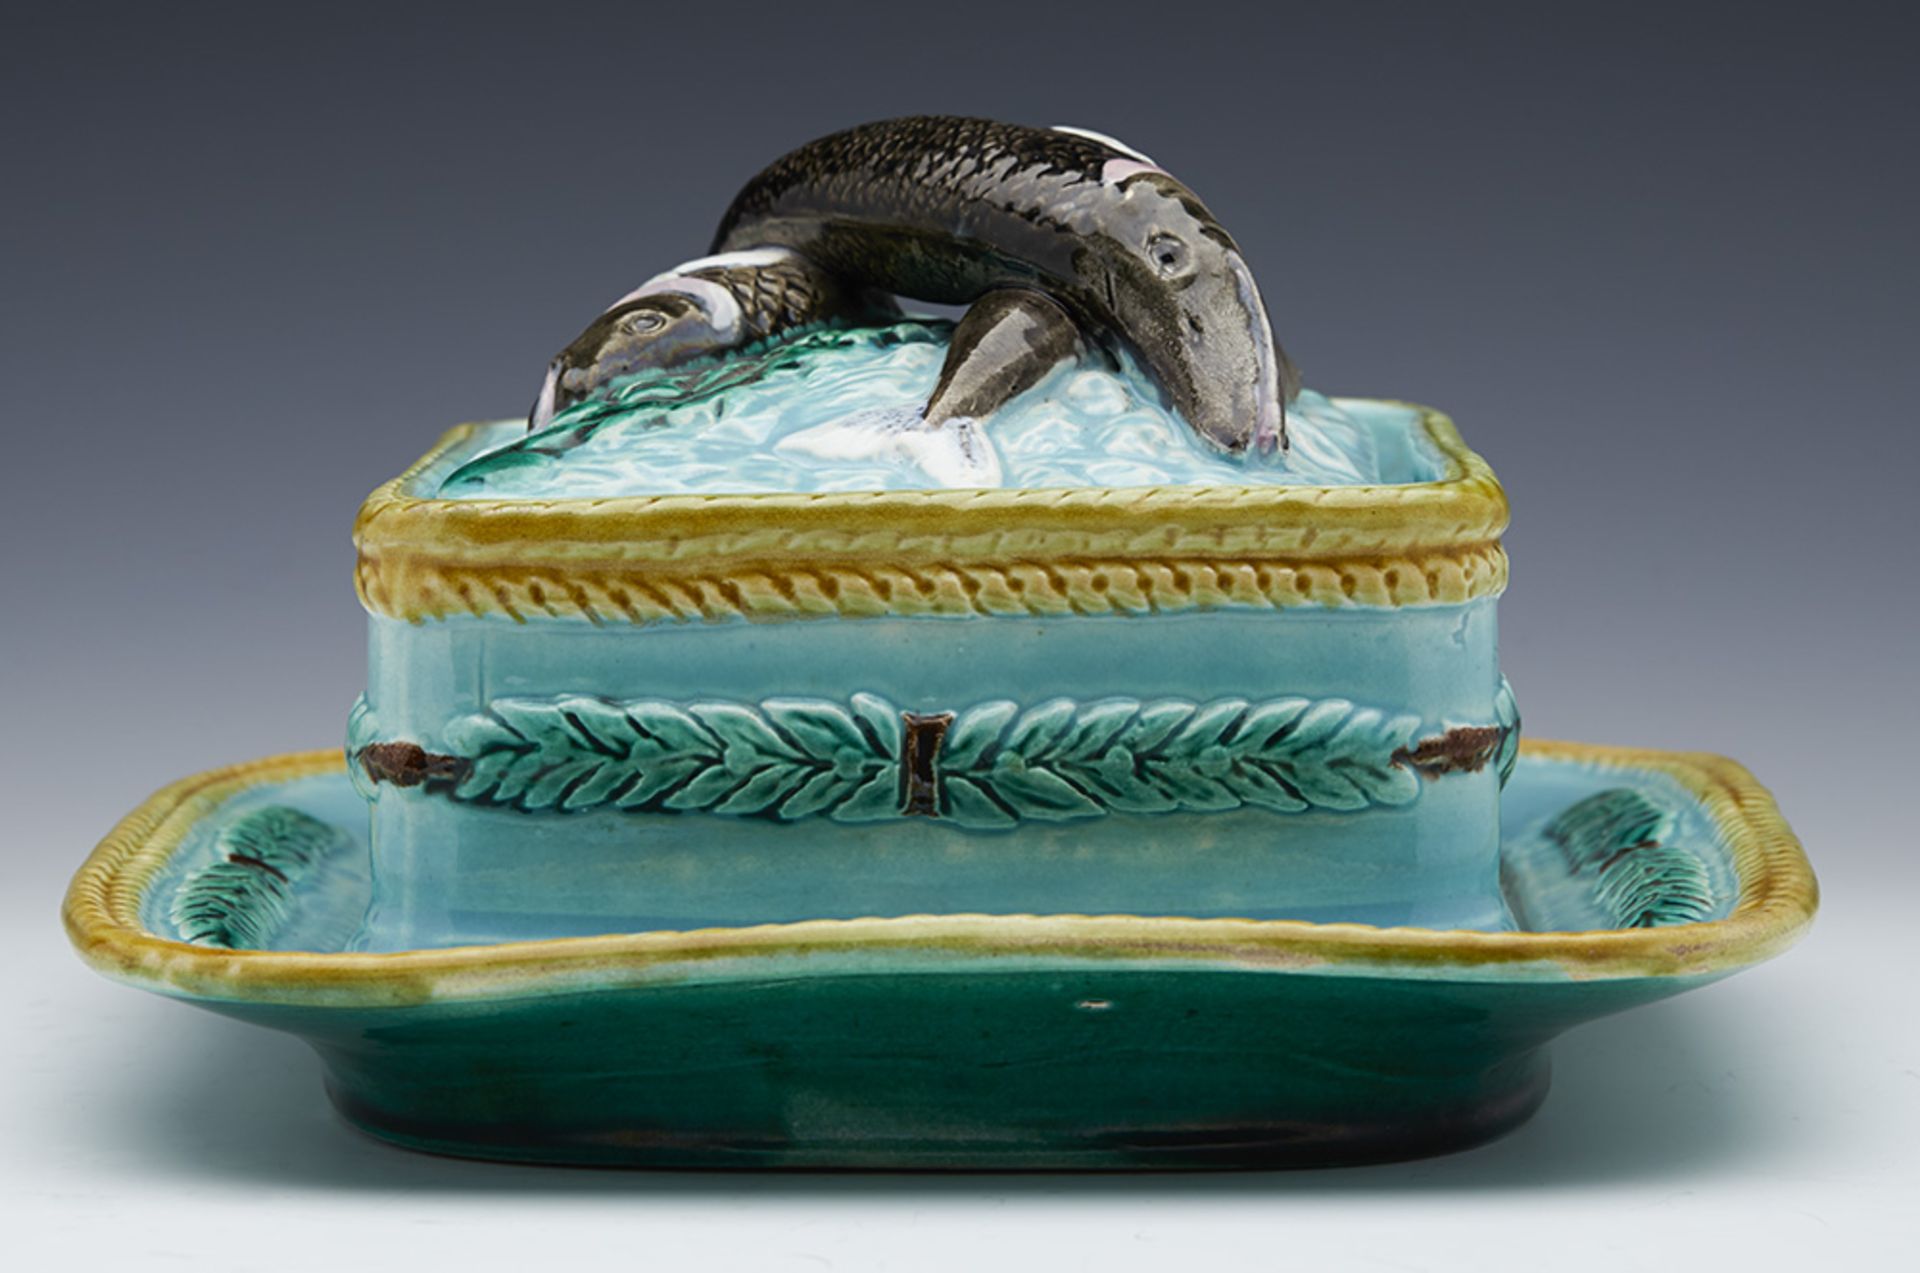 Antique English Majolica Sardine Dish With Fish And Leaves C.1865 - Image 5 of 10